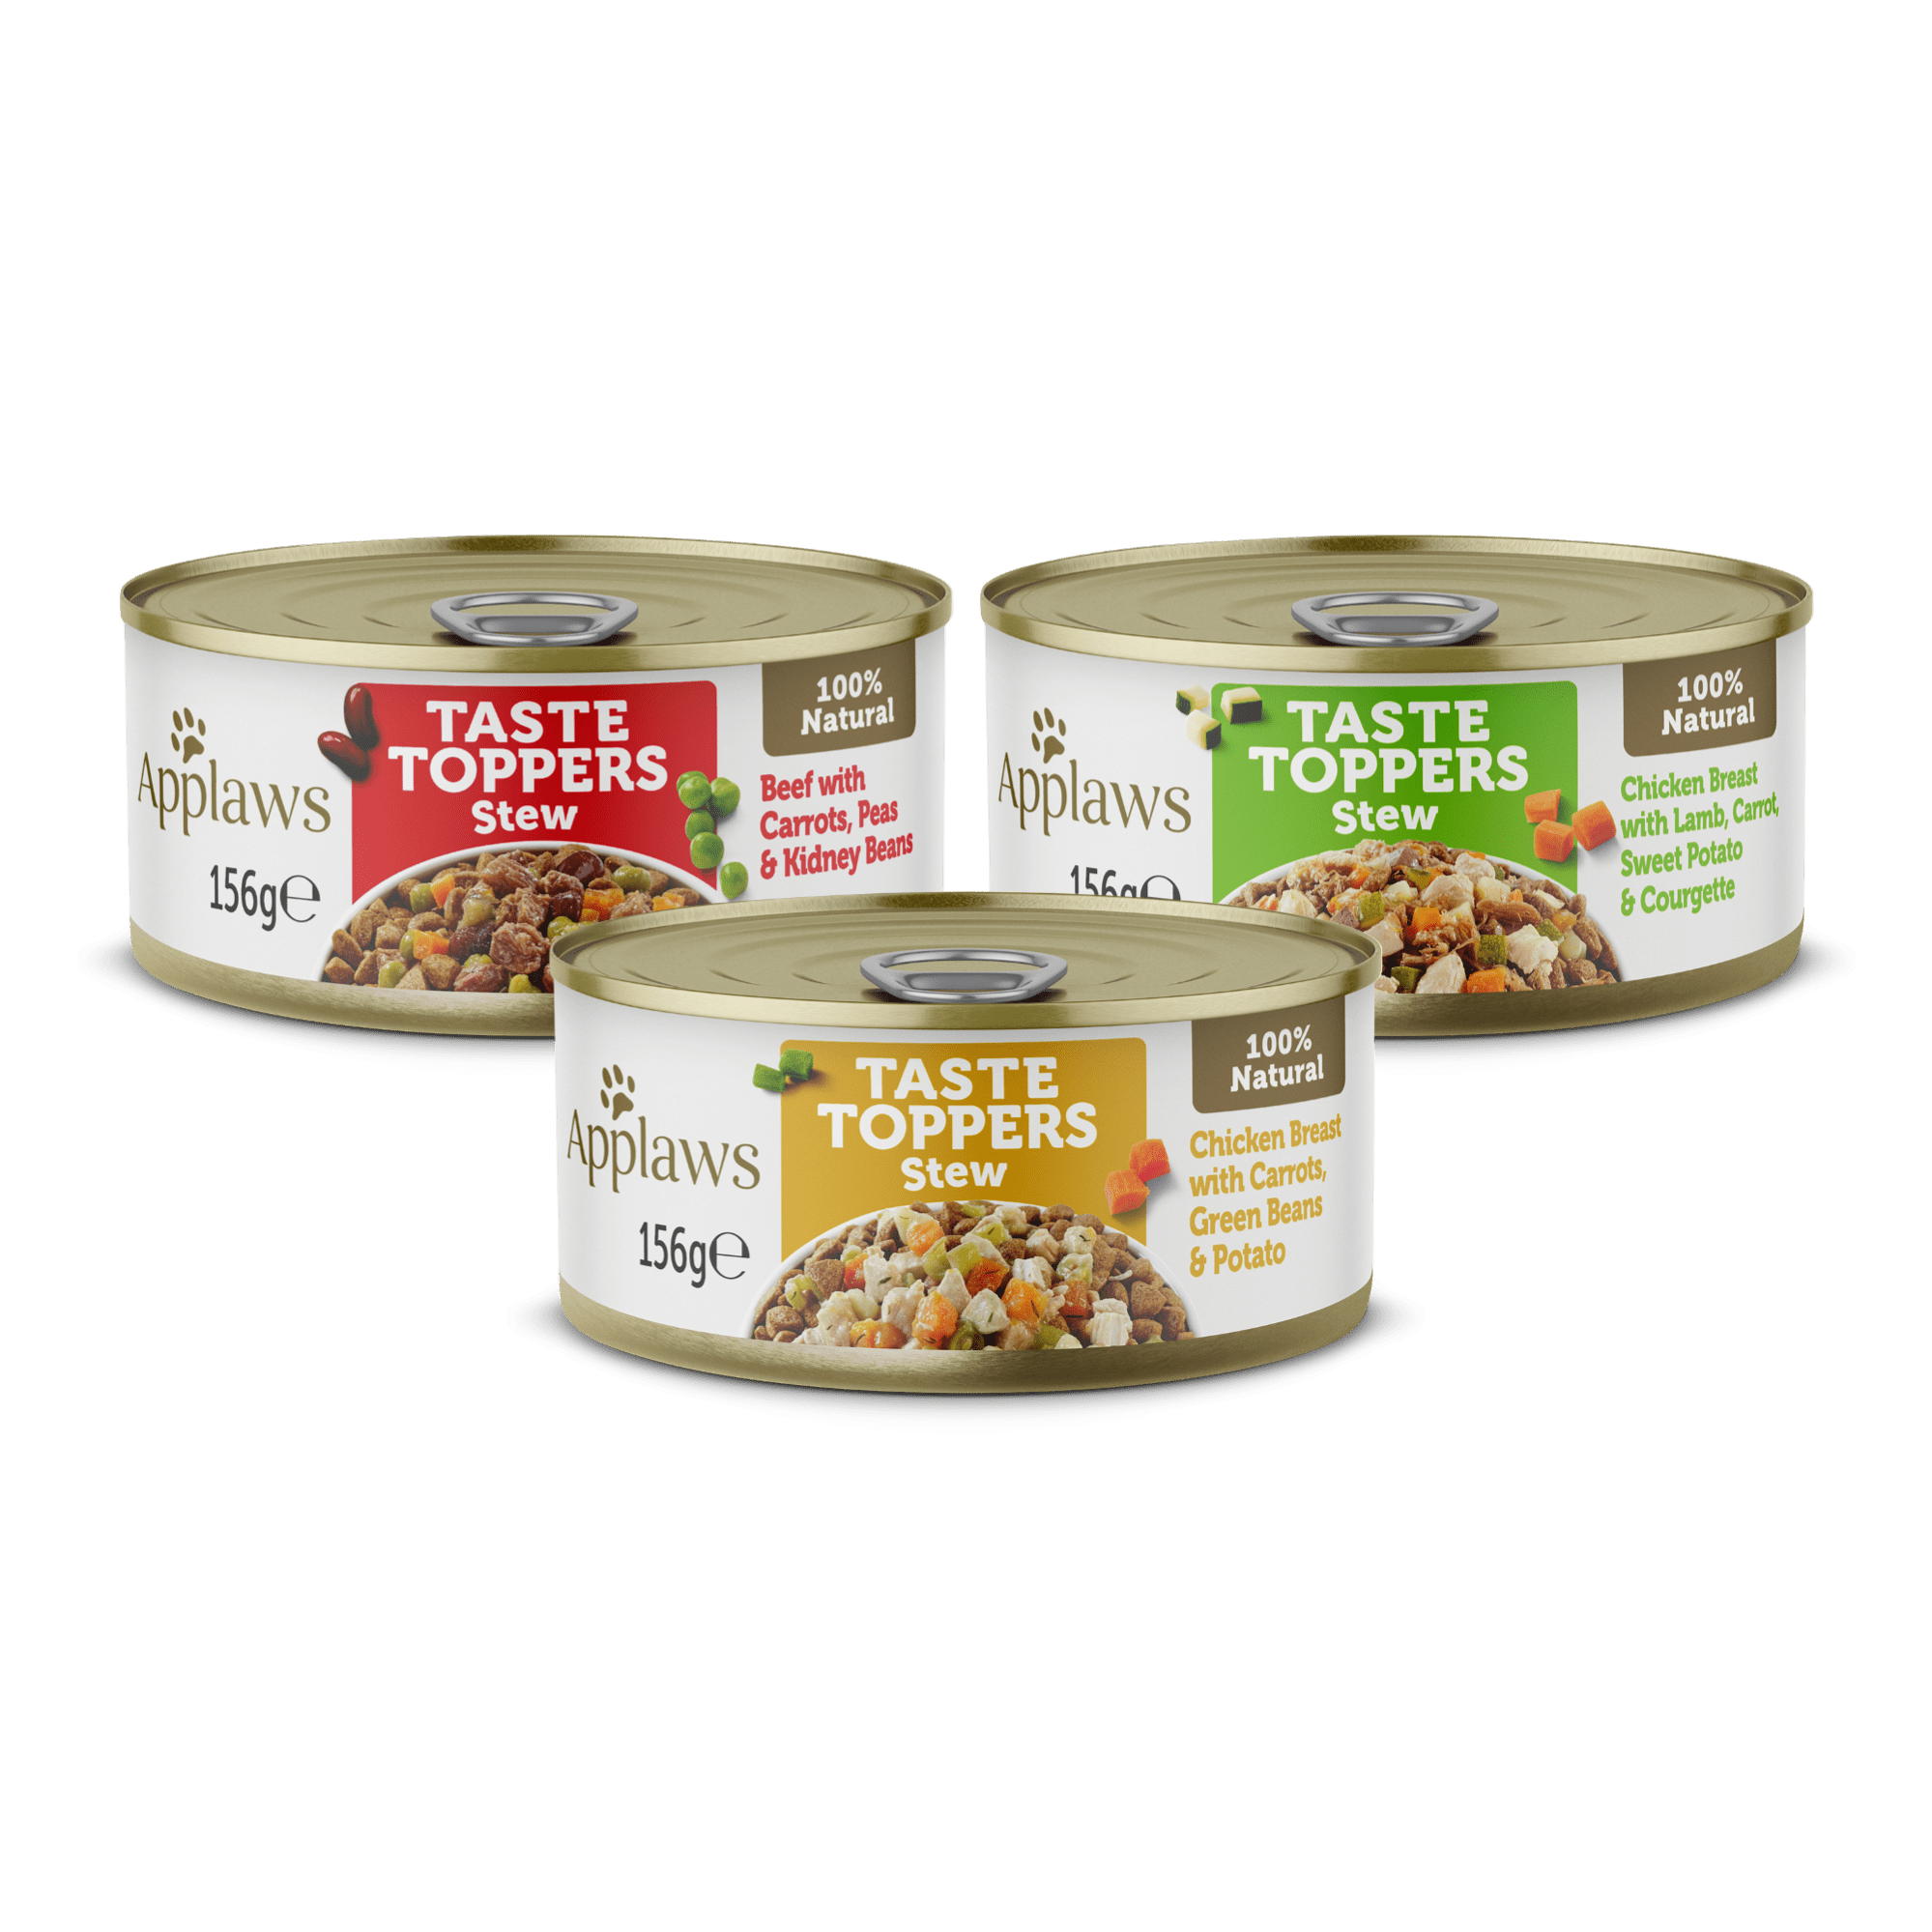 Applaws Taste Toppers Stew Selection Tin 4x (8x156g), Applaws,